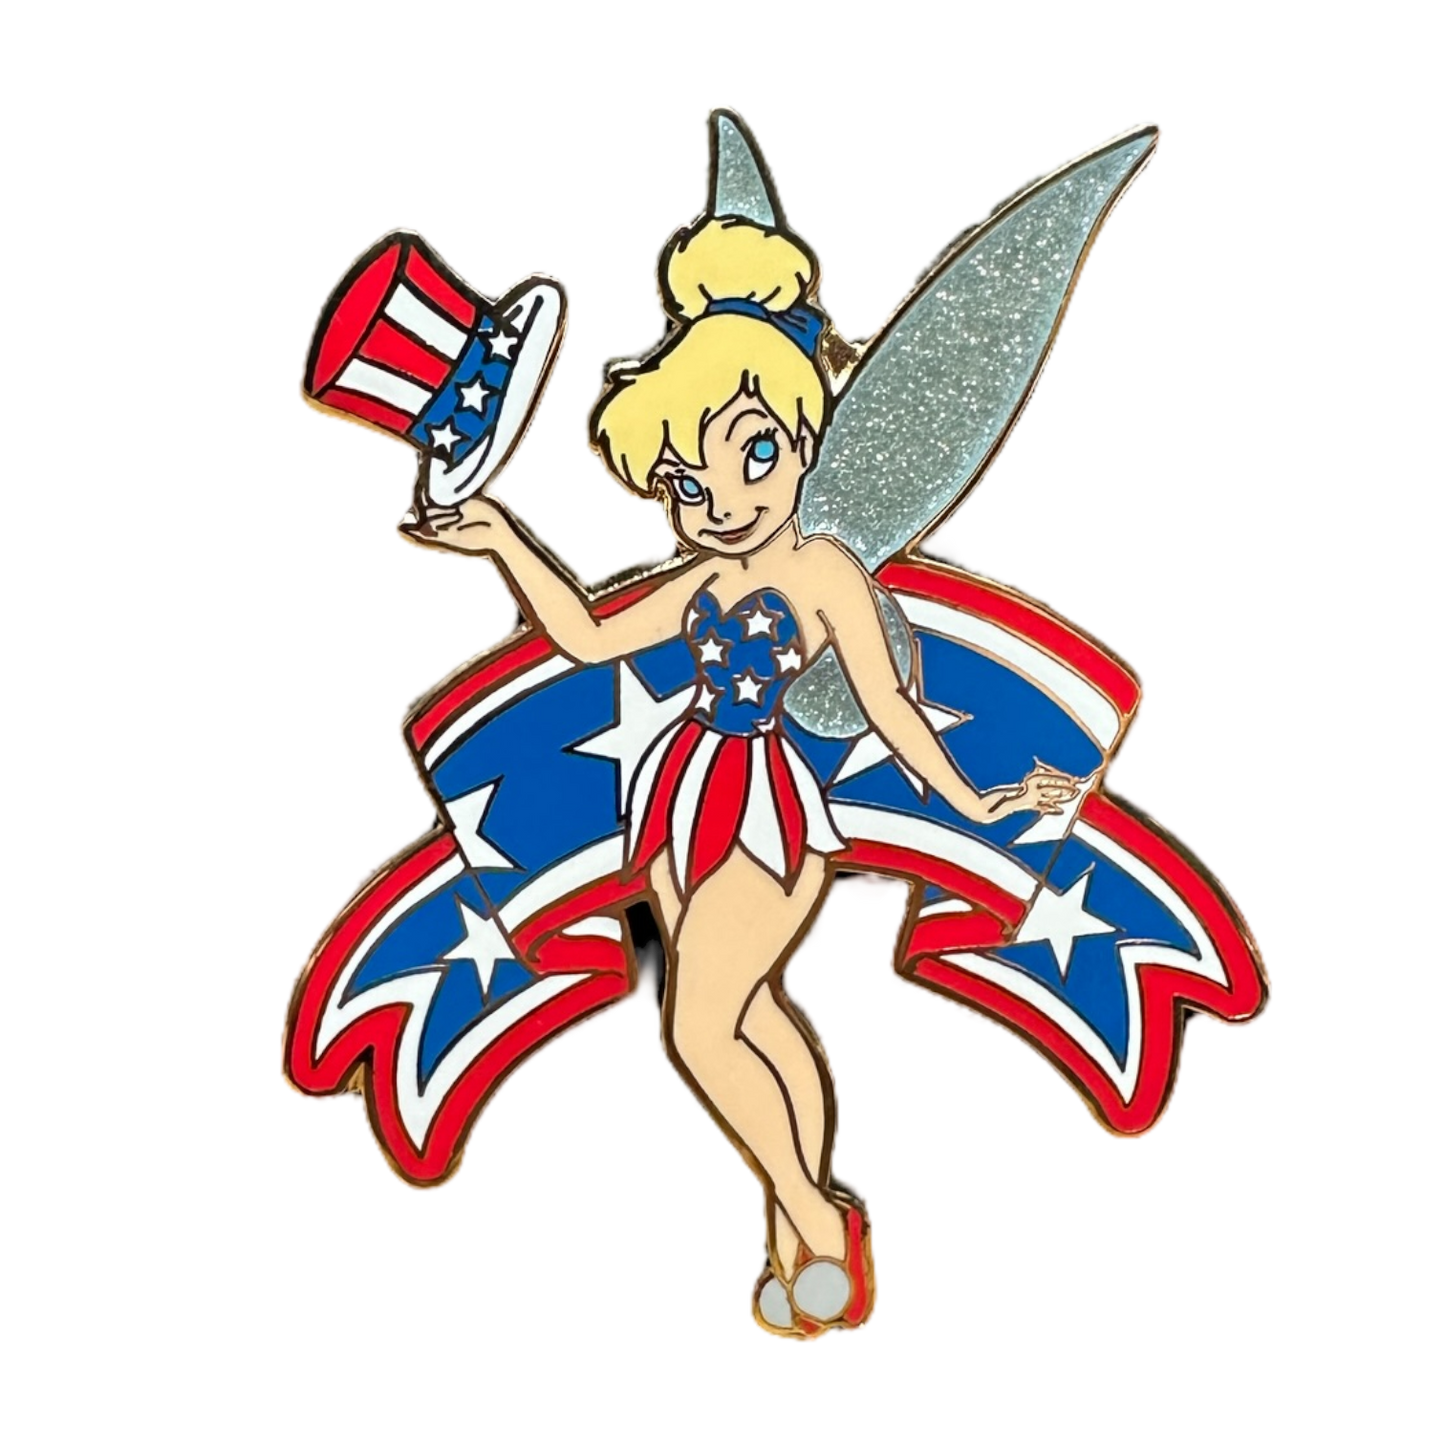 Disney Auctions Patriotic Flag Tinker Bell Pin